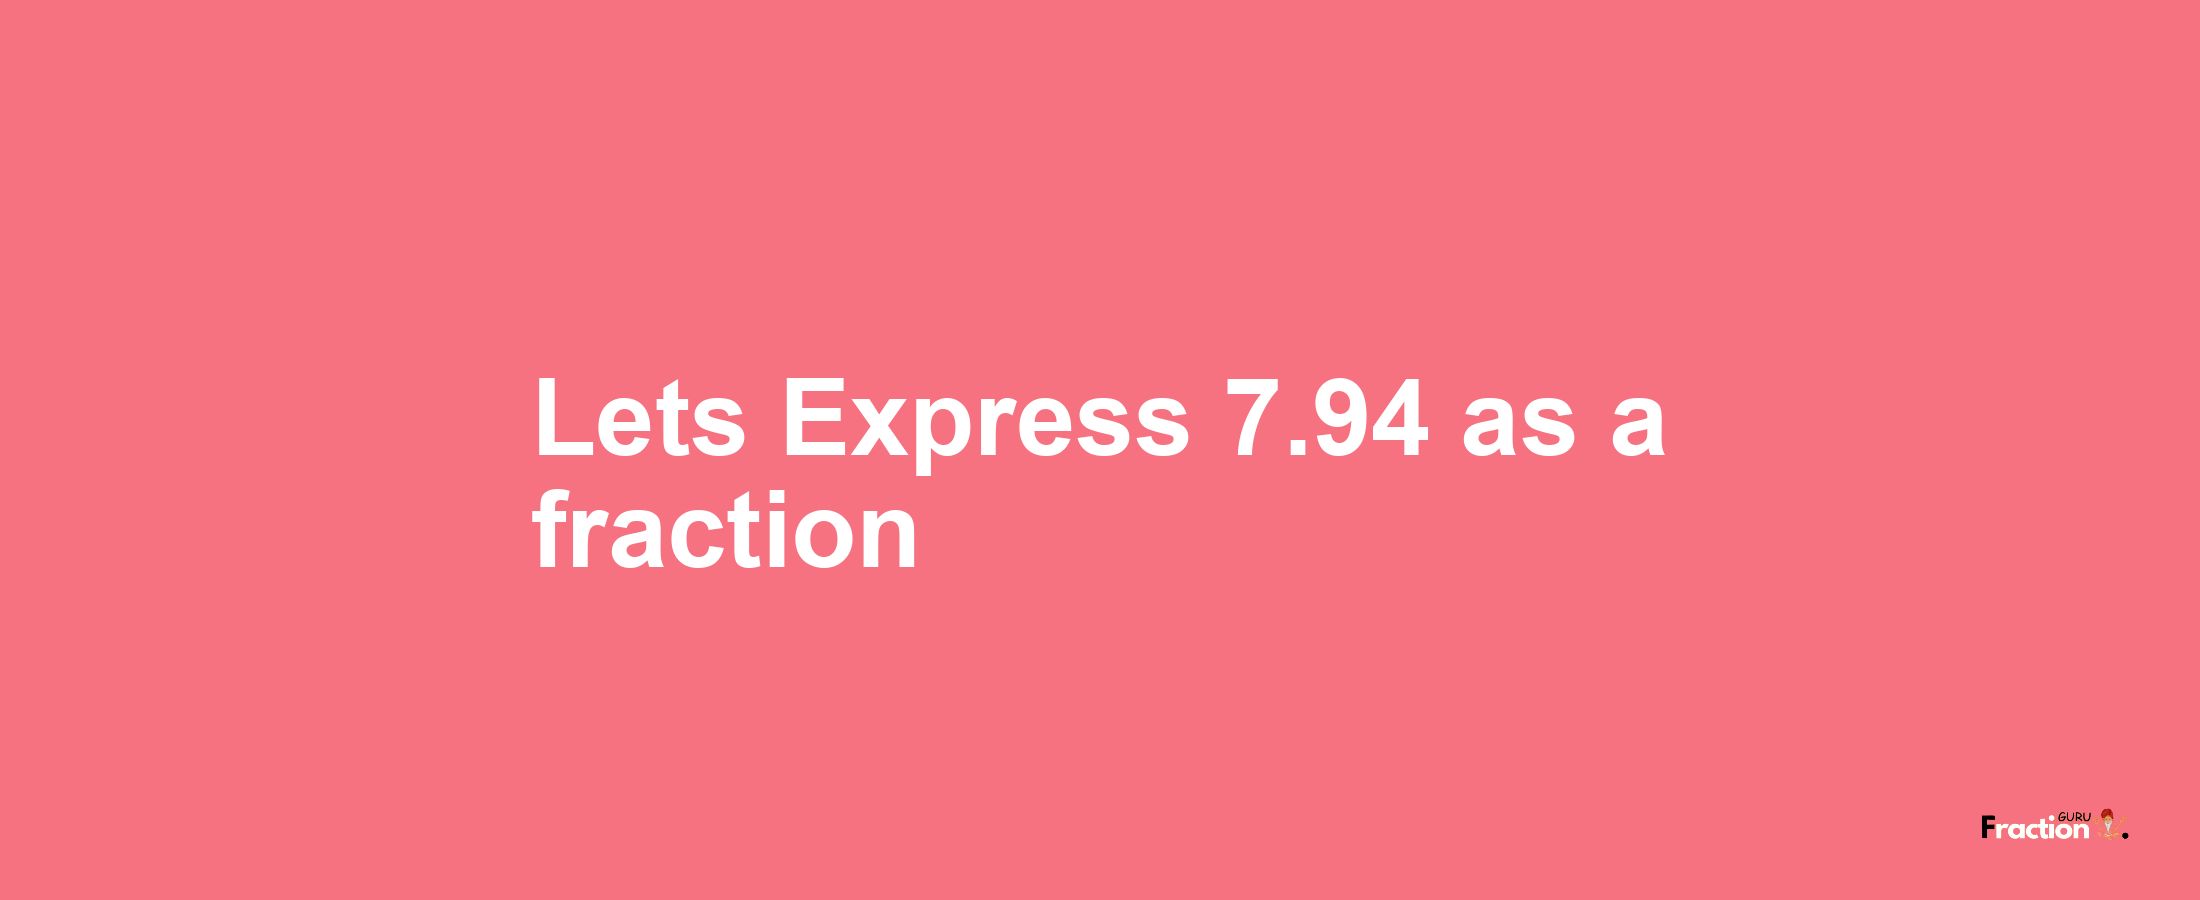 Lets Express 7.94 as afraction